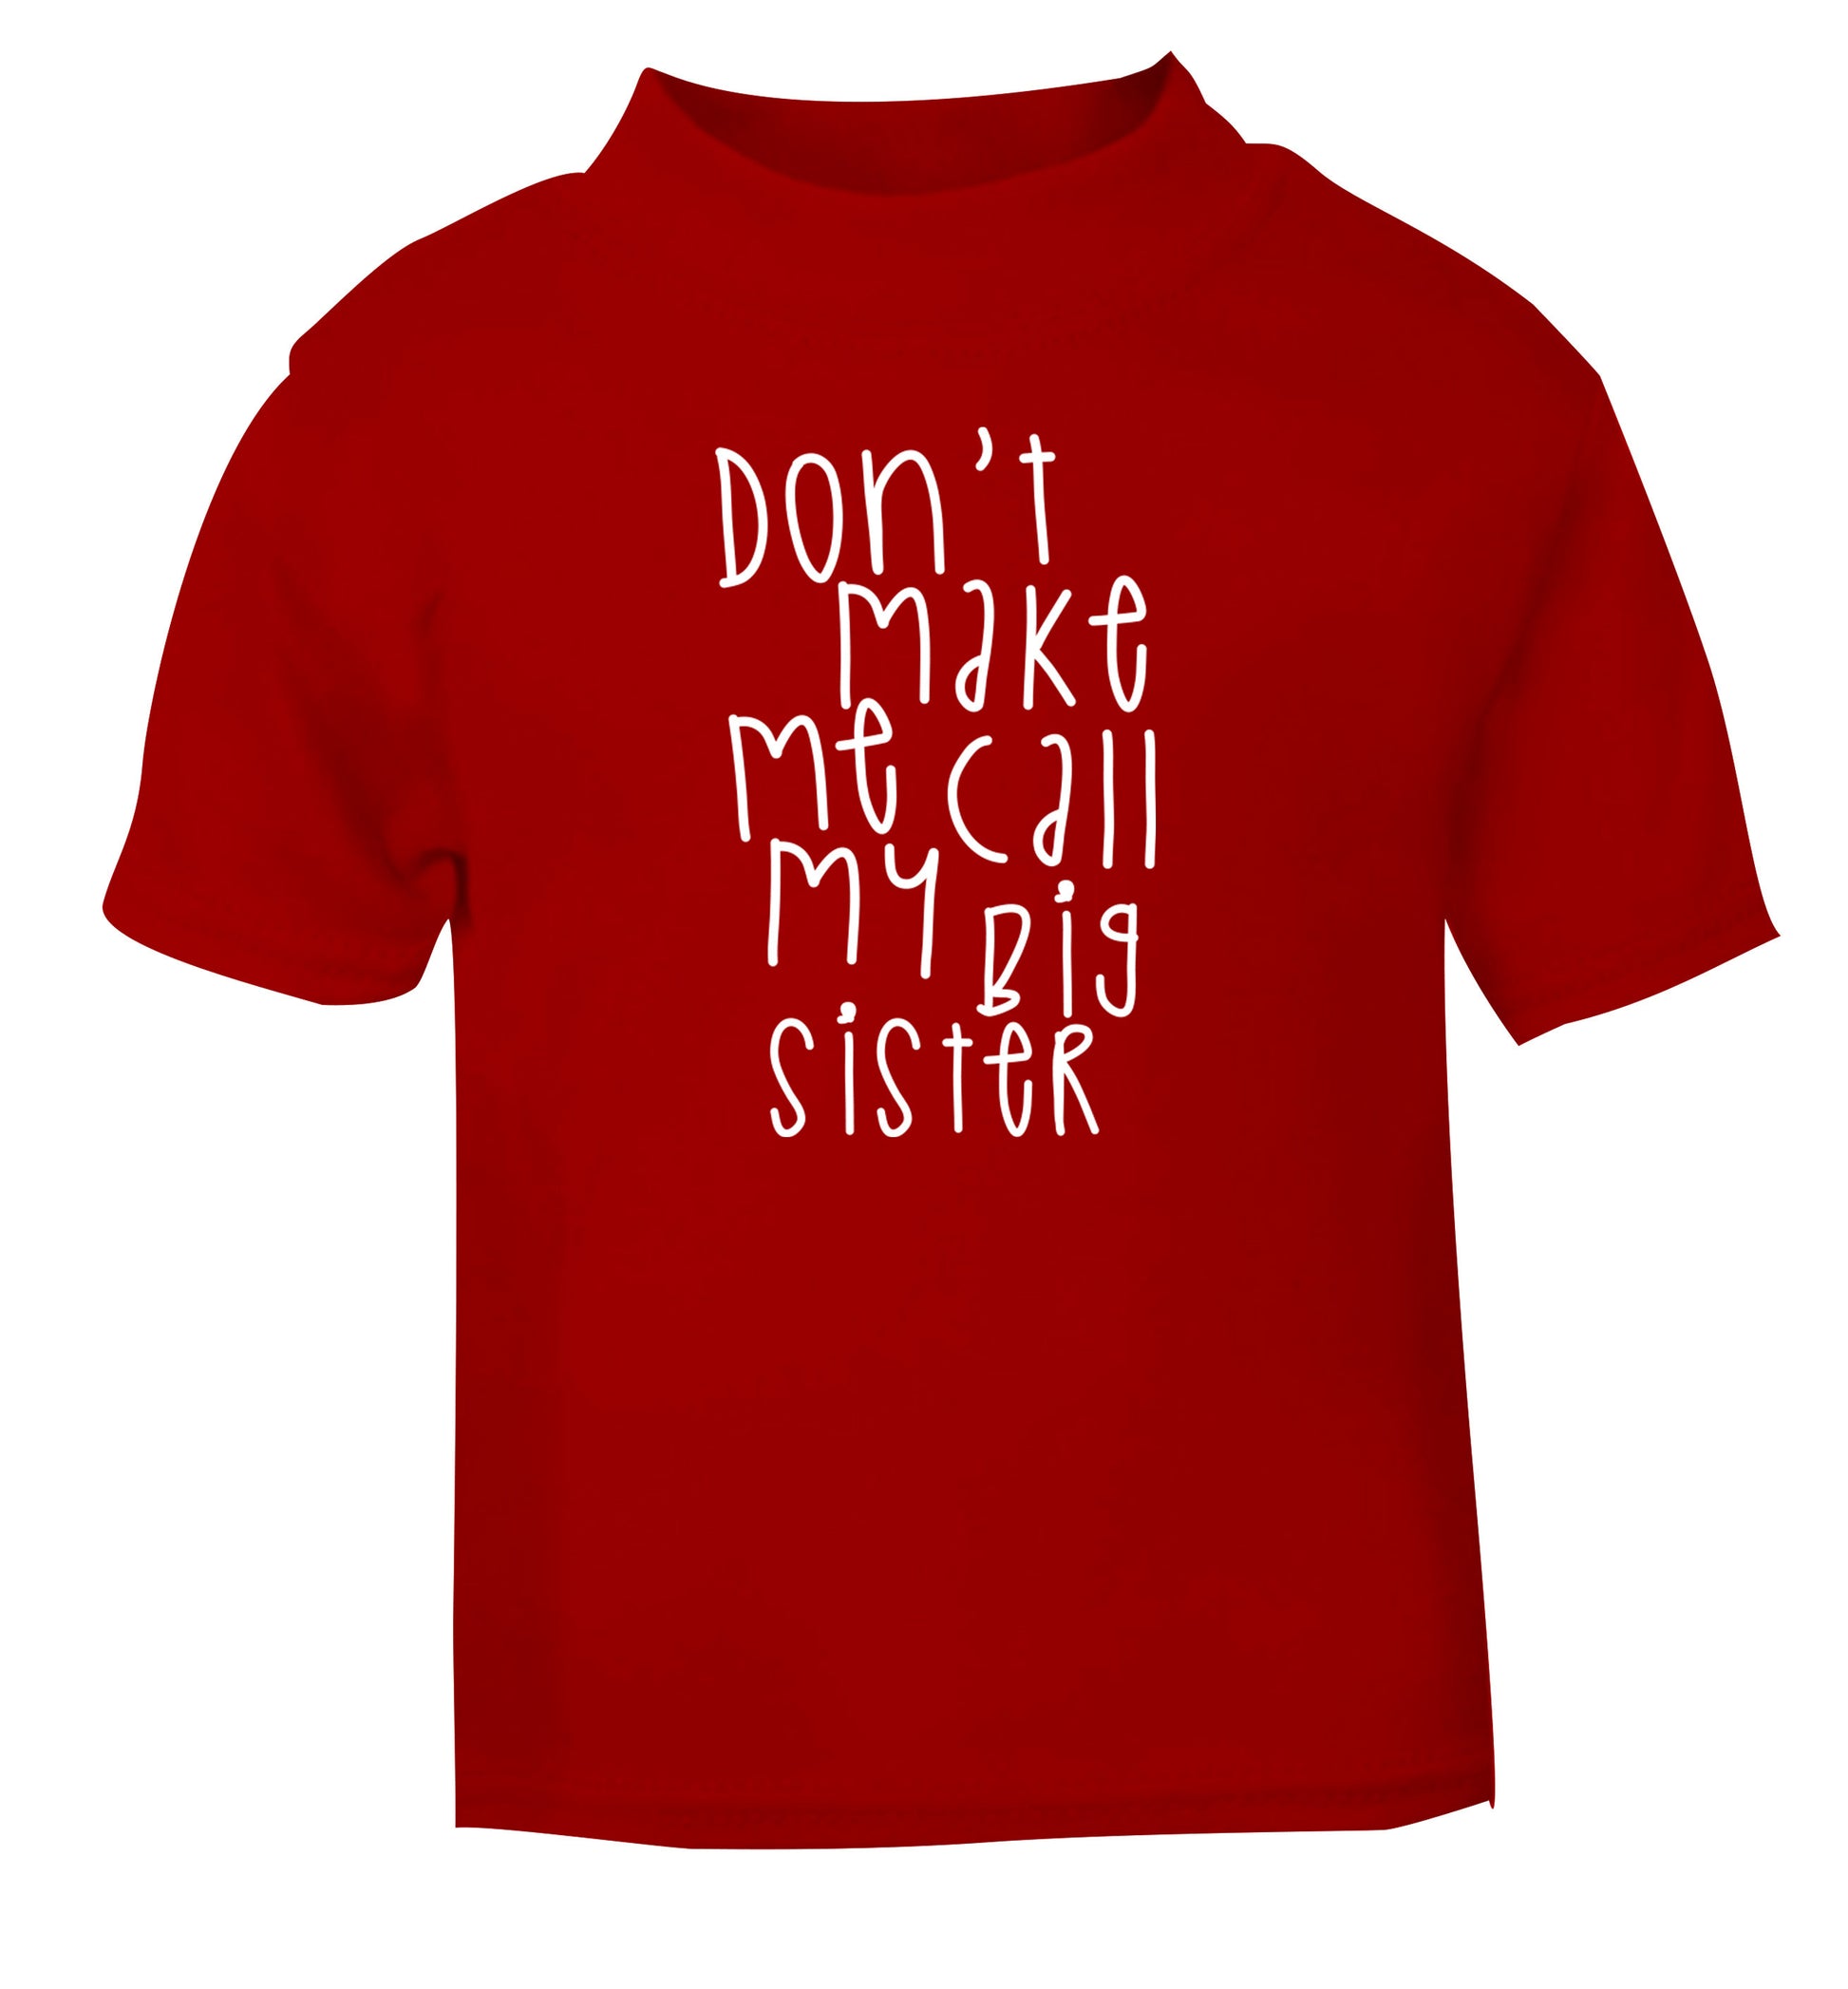 Don't make me call my big sister red Baby Toddler Tshirt 2 Years